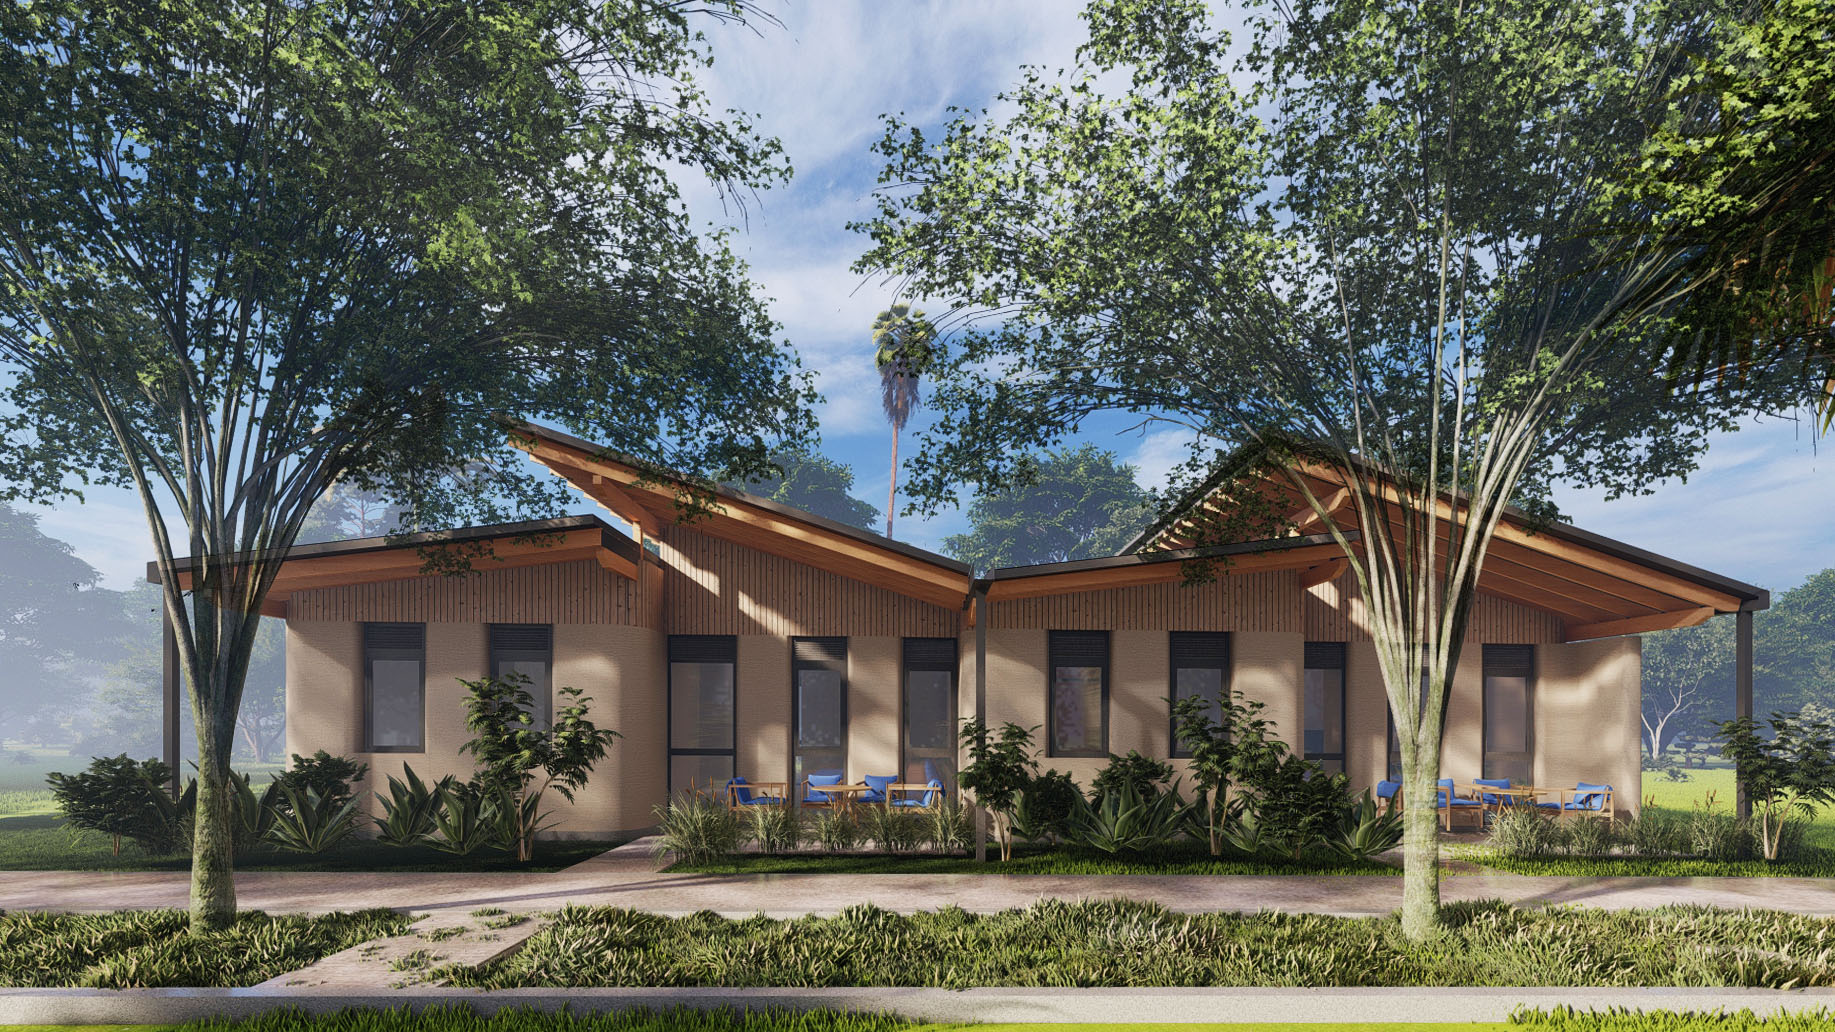 A render of one of the homes in the Mvule Gardens complex. Image via 14Trees.